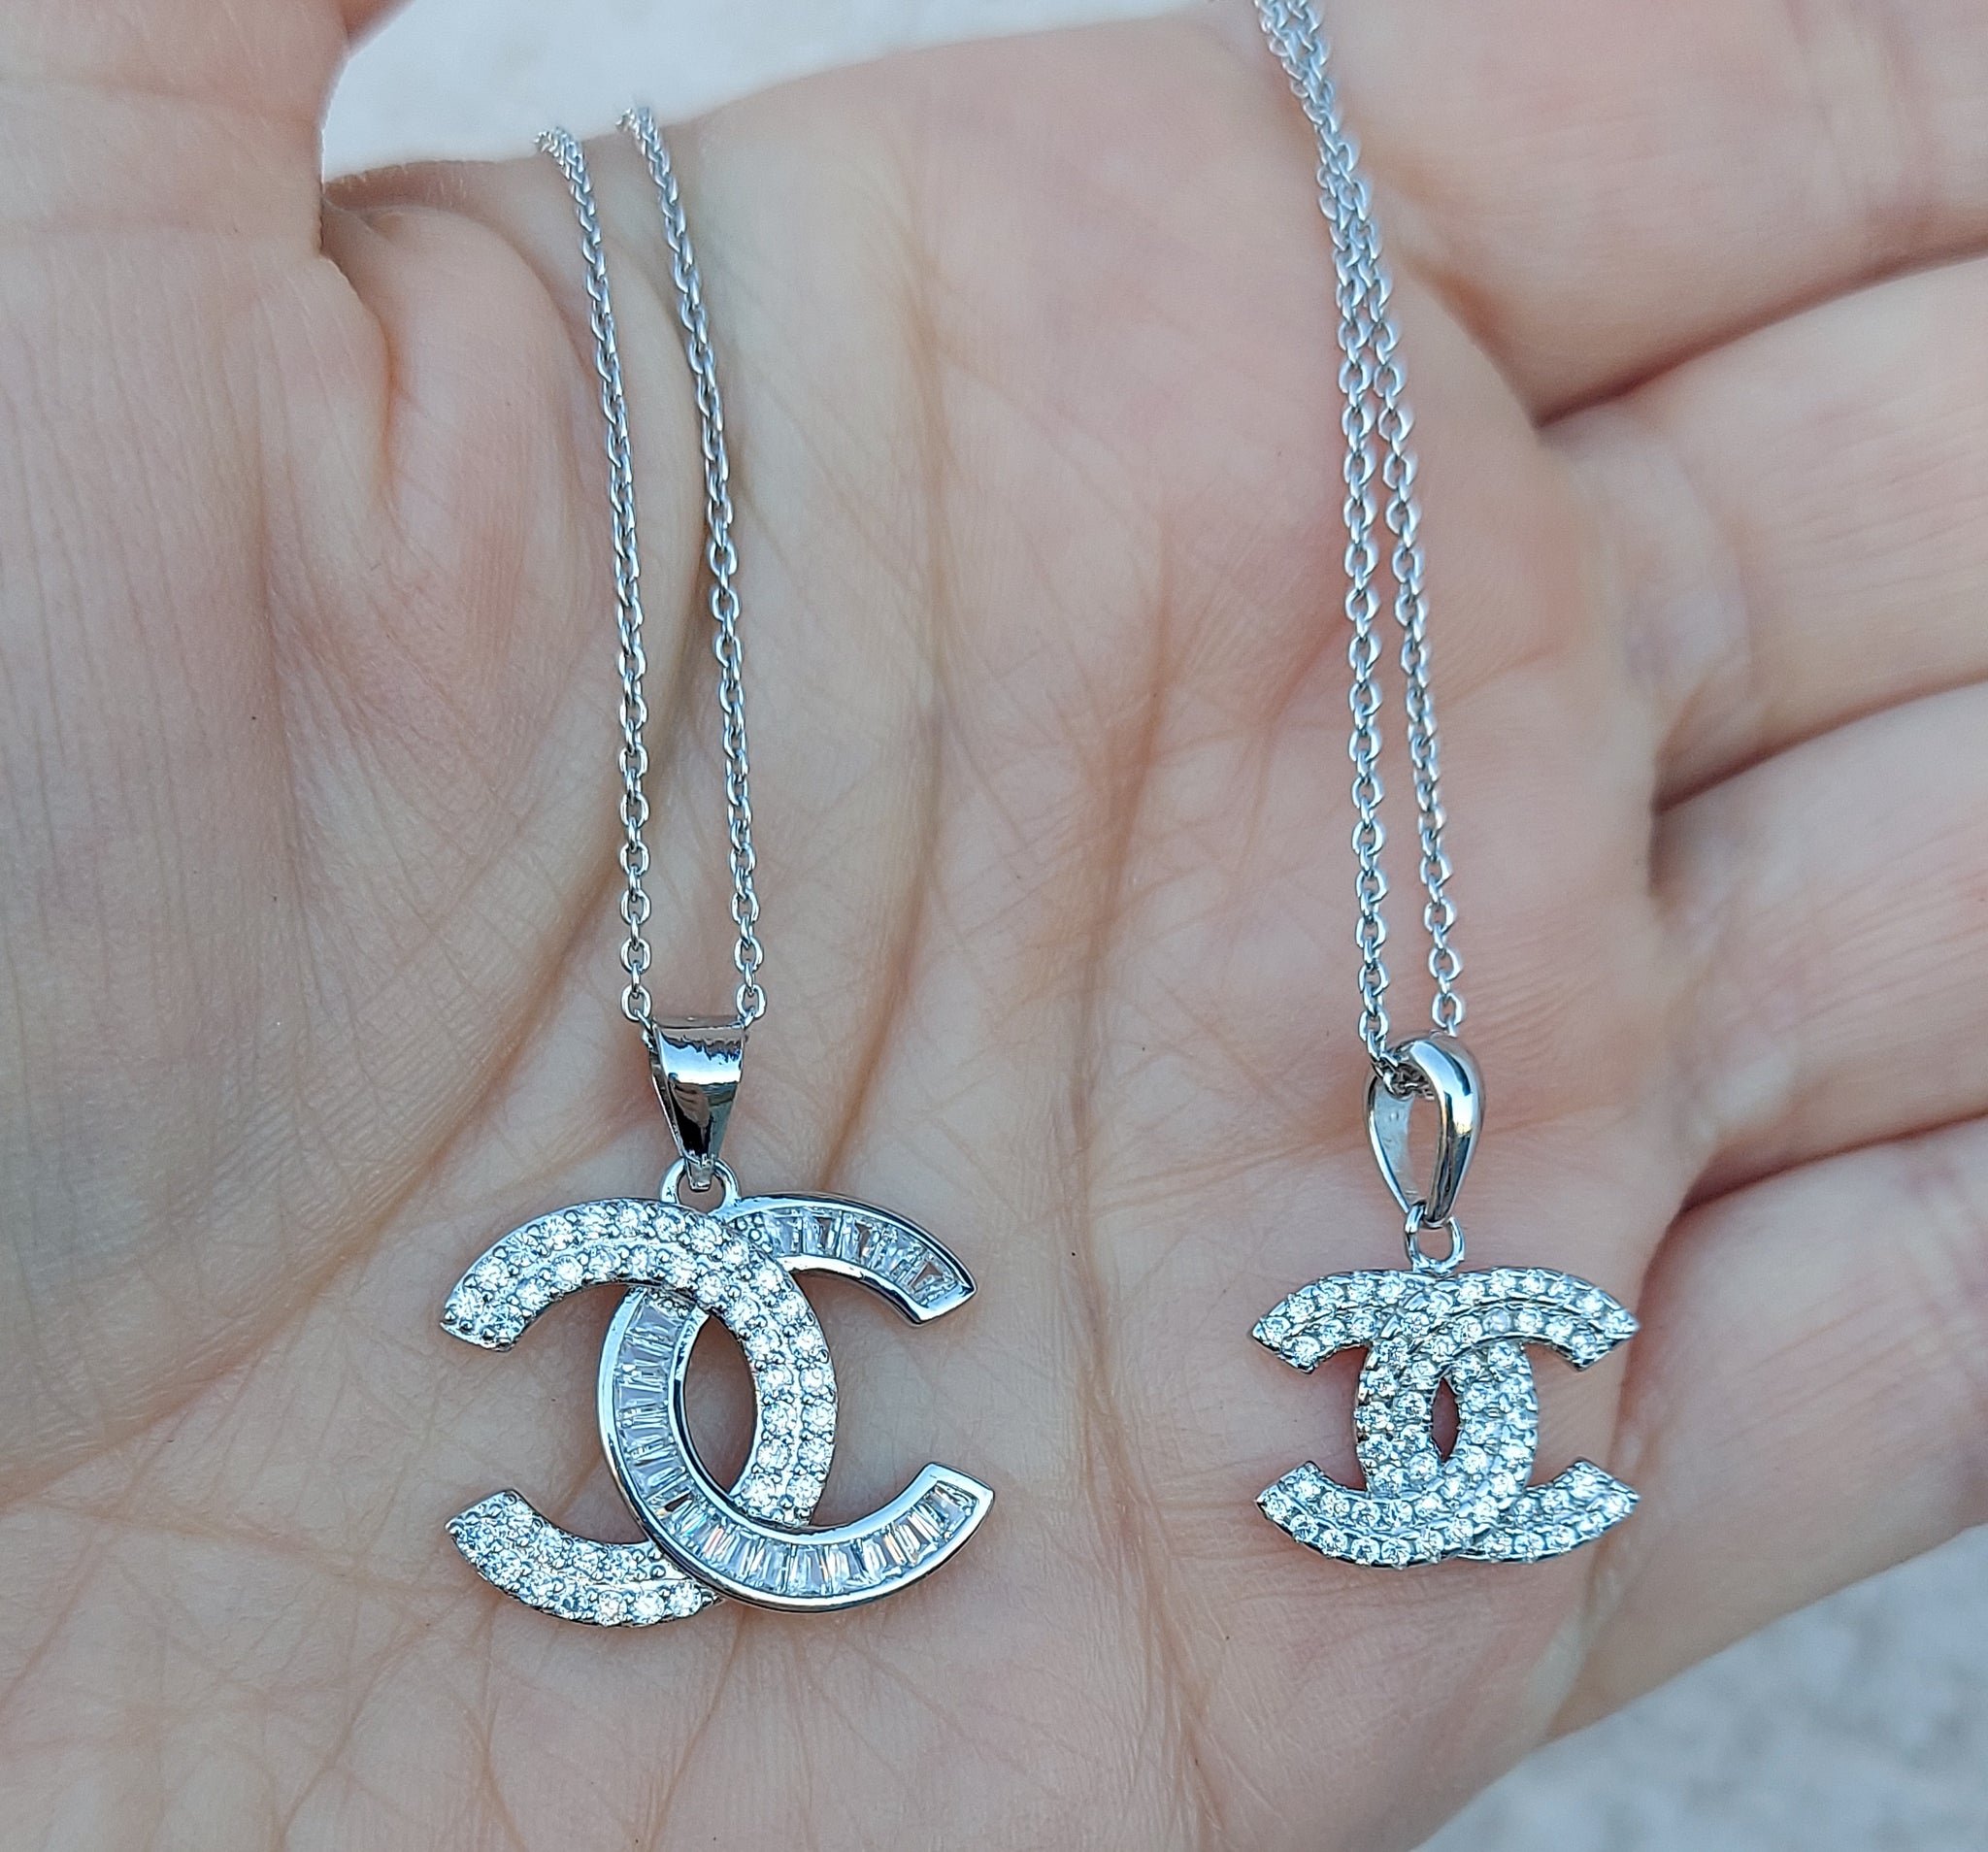 Silver Necklace - Inspired Designs